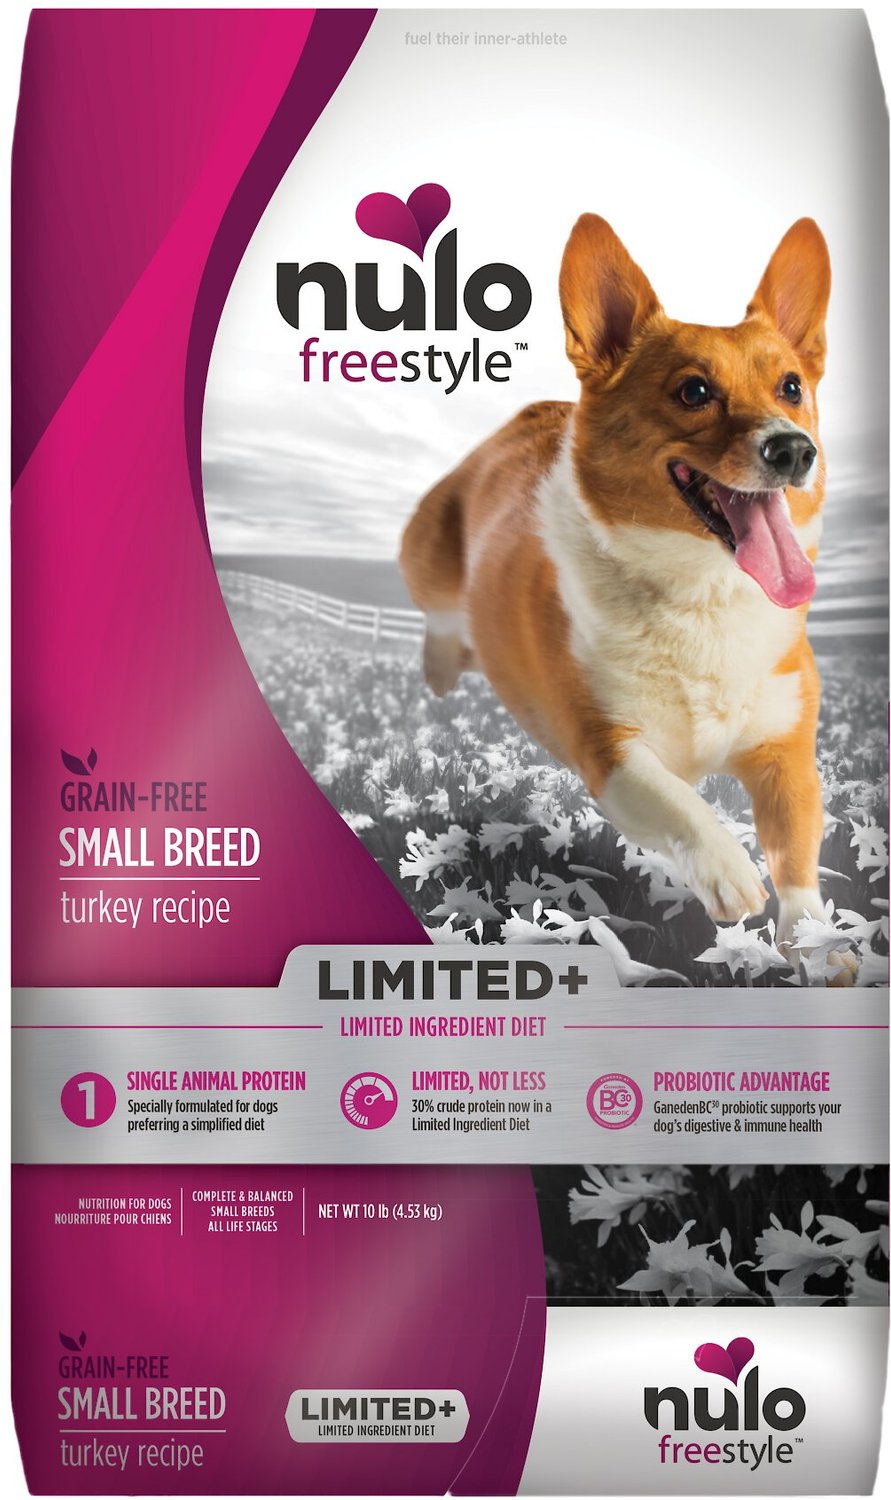 Nulo Freestyle Limited+ Turkey Recipe Grain-Free Small Breed Adult Dry